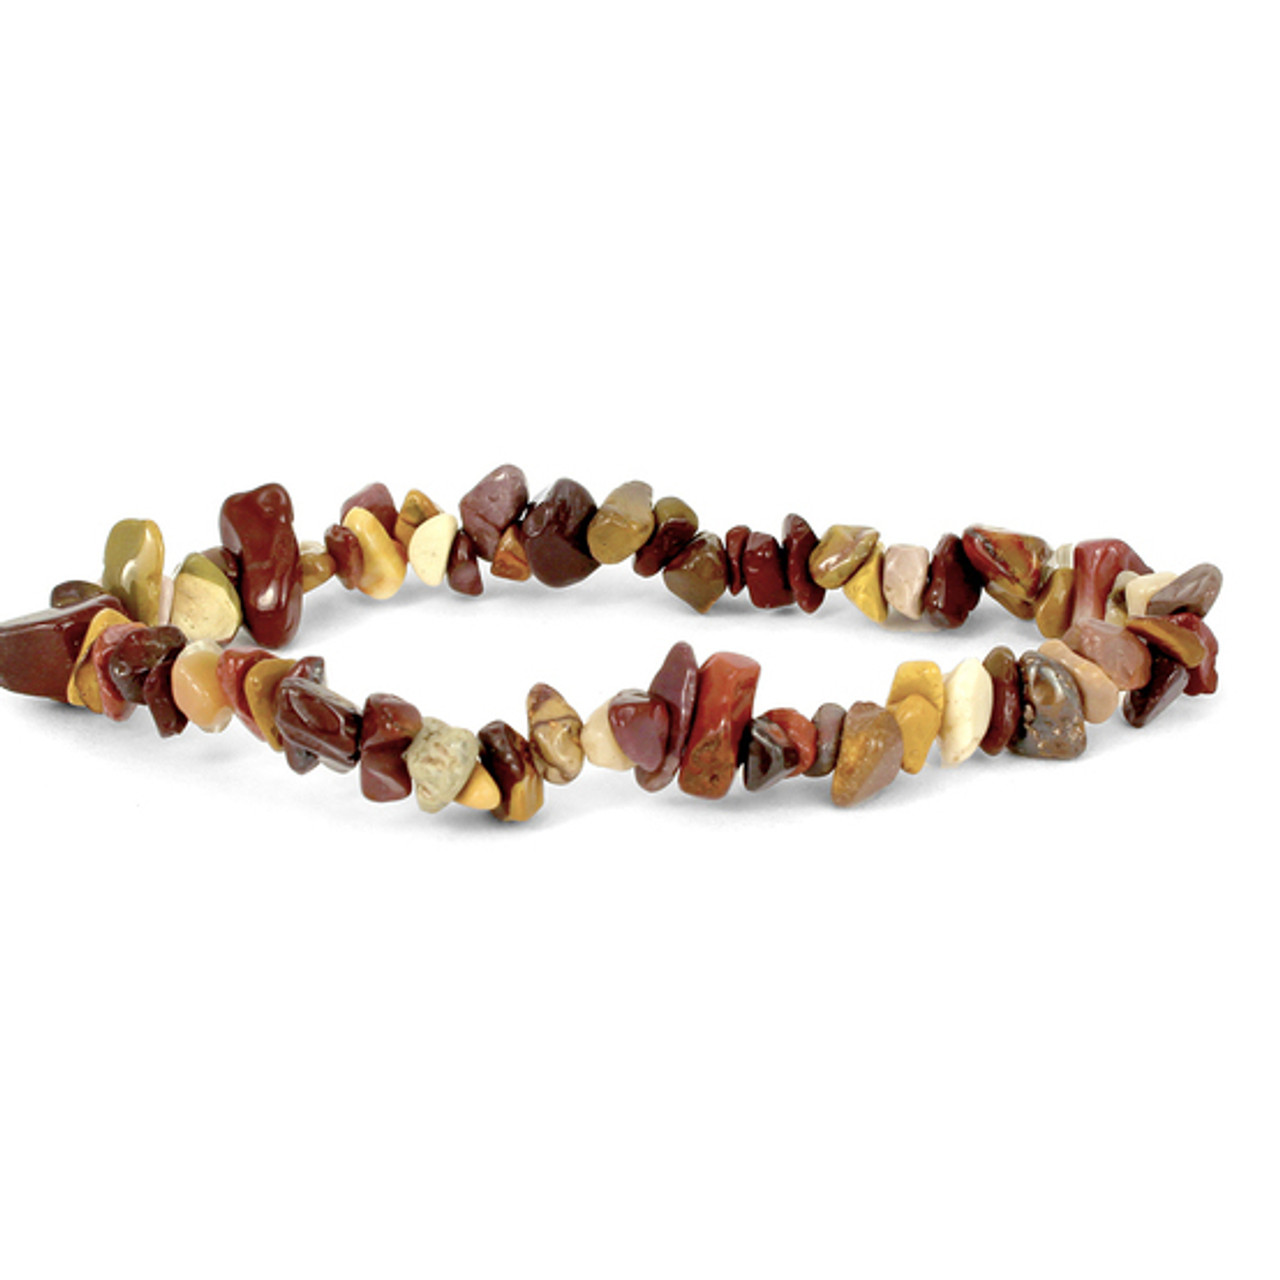 Mookaite Jasper Stone Chip Stretch Bracelets - Intuitively Chosen for  Grounding and Stability | Copper Bug Jewelry